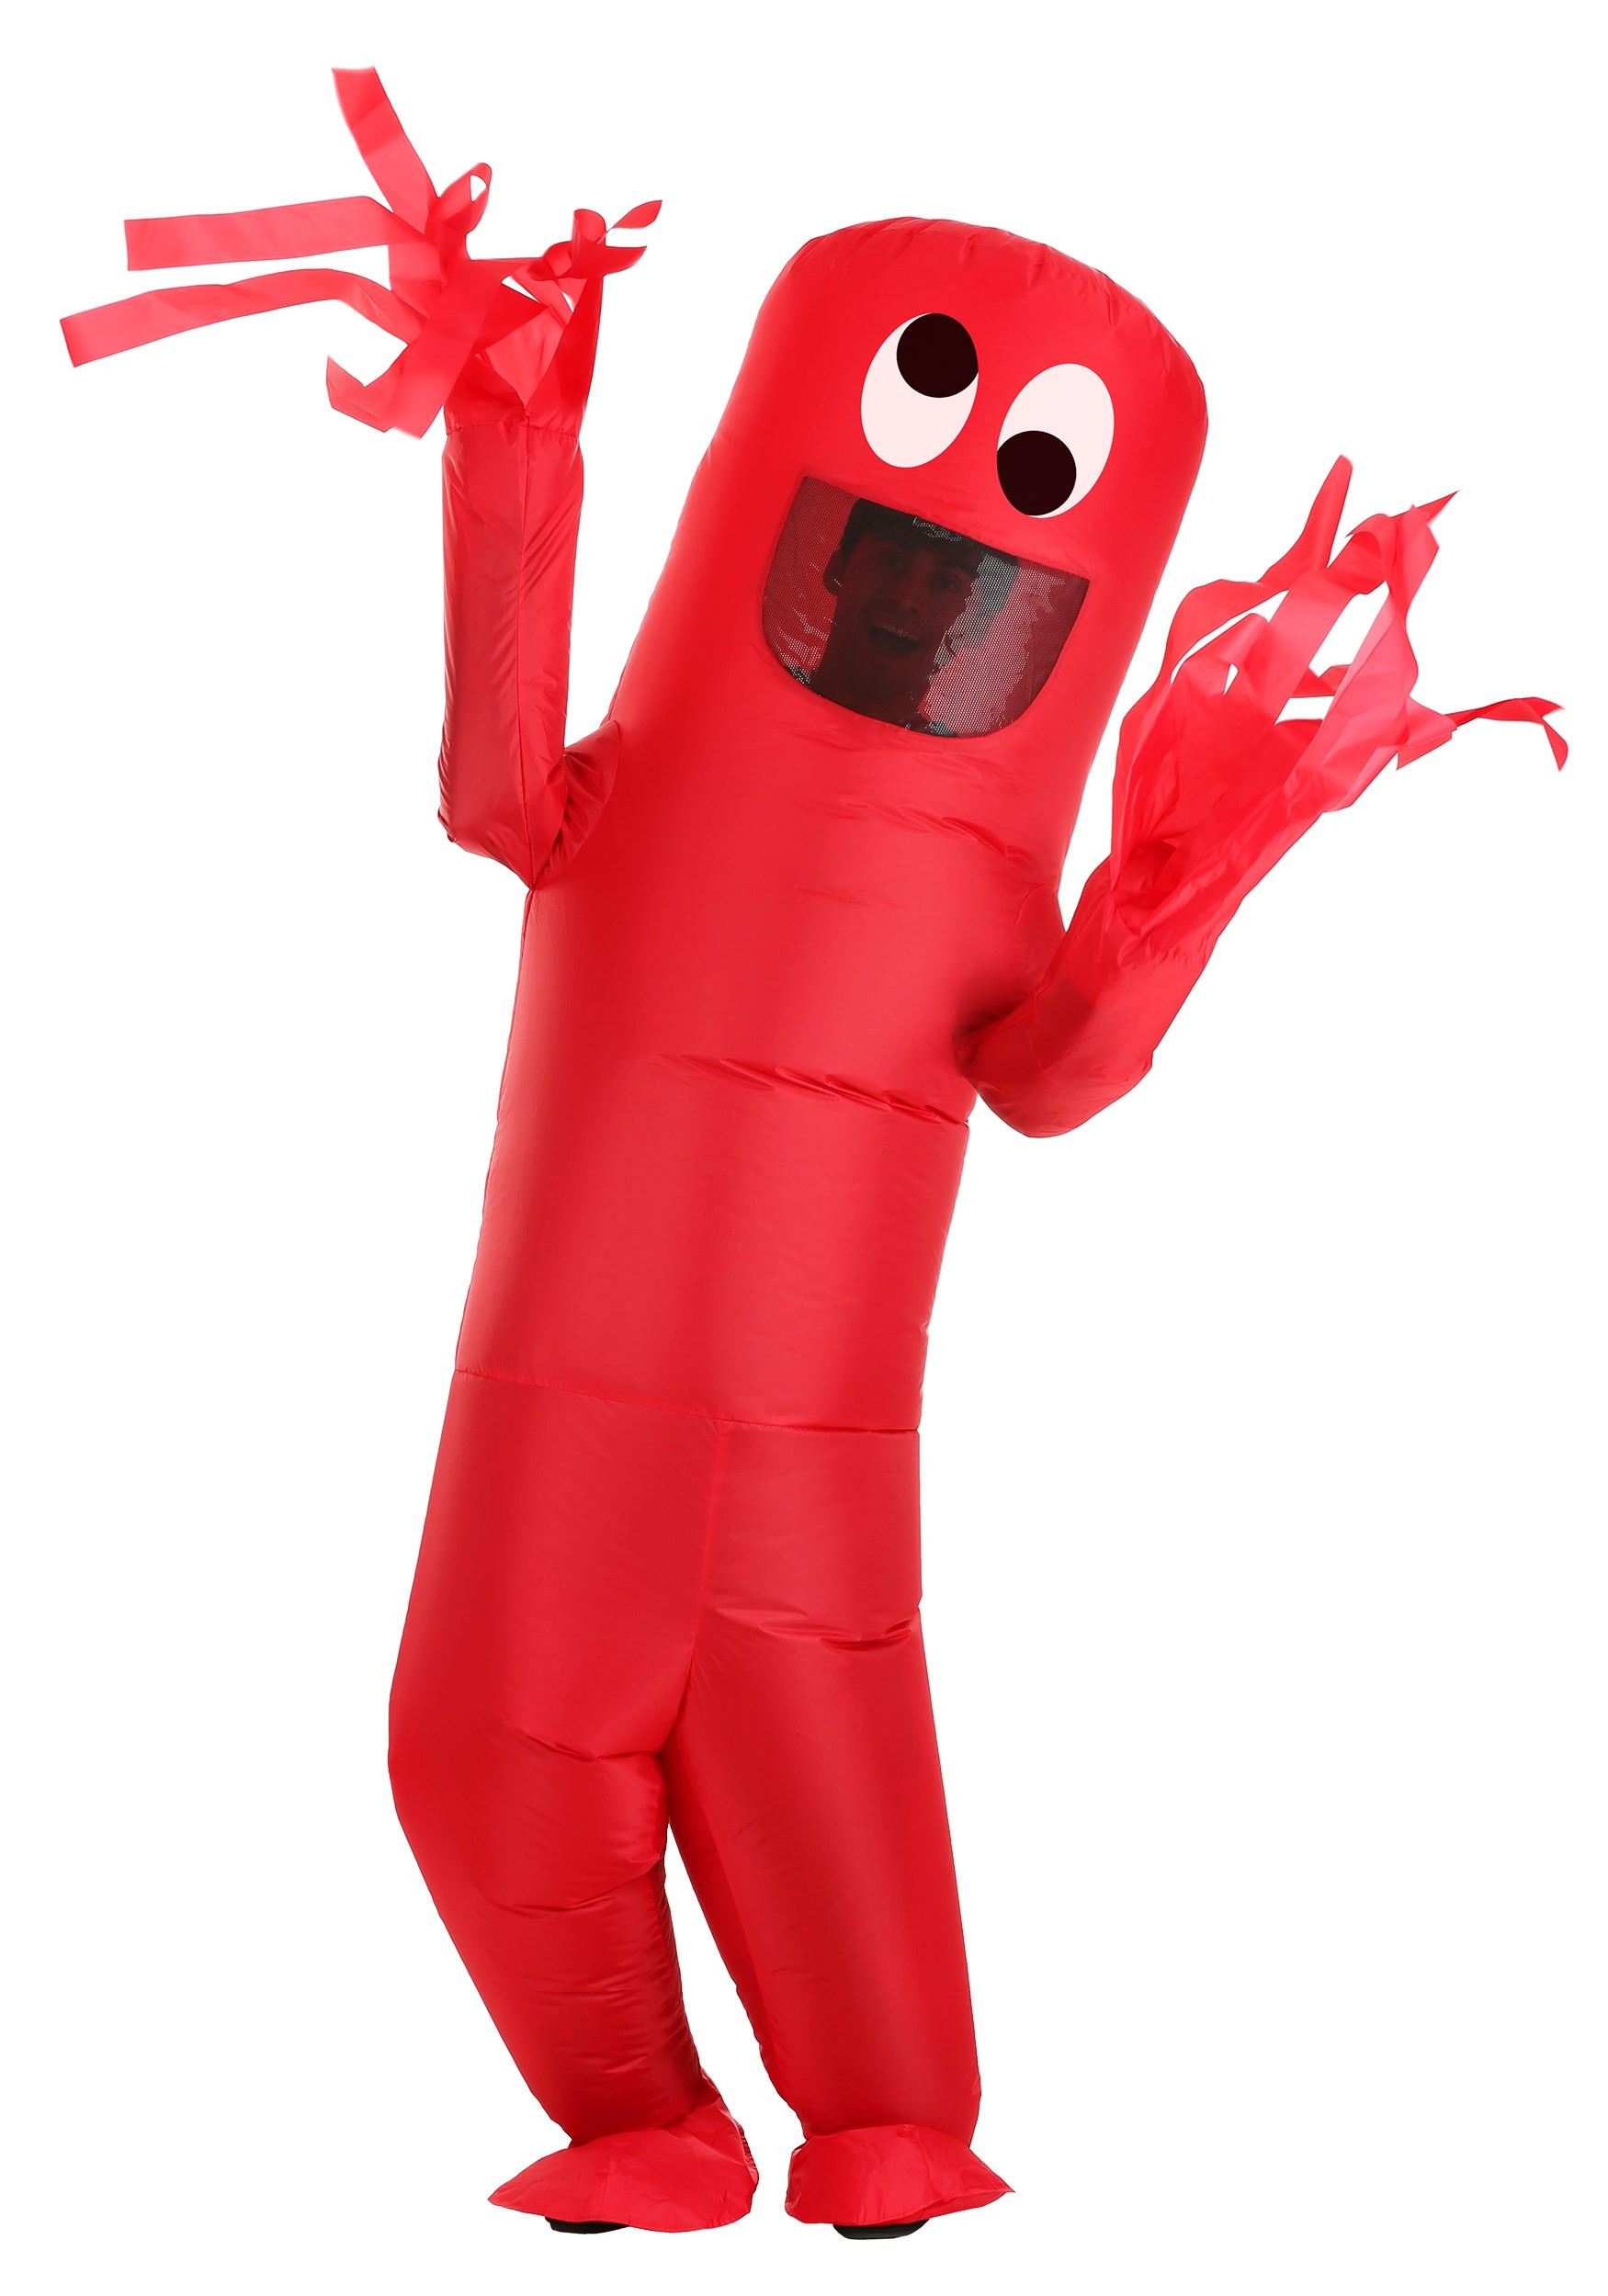 Fun Costumes Adult Wacky, Waving, Inflatable Tube Man Costume Red St